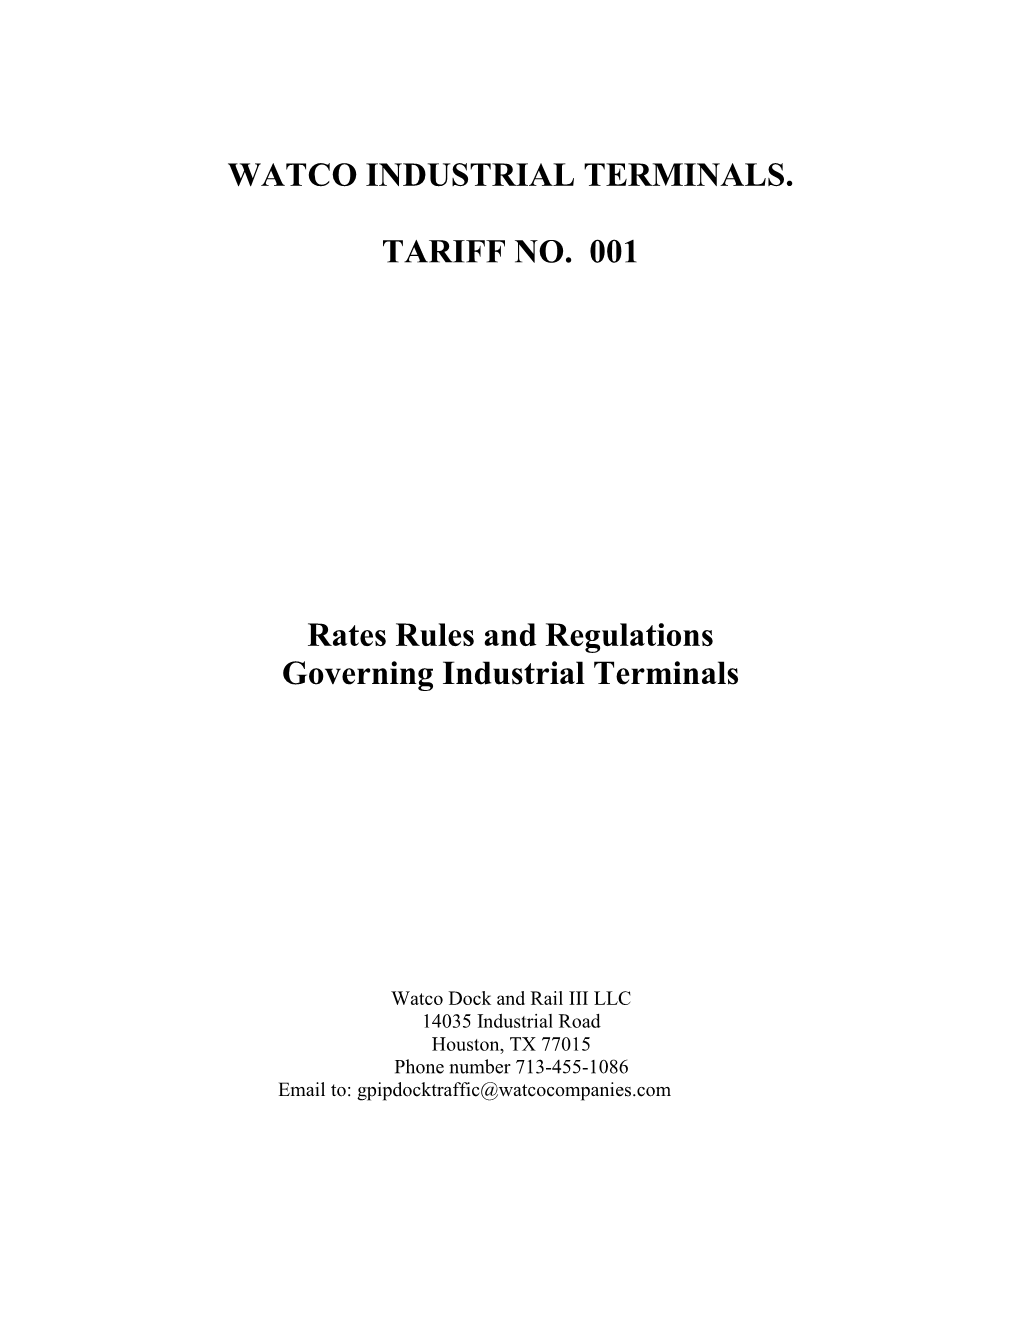 WATCO INDUSTRIAL TERMINALS. TARIFF NO. 001 Rates Rules And